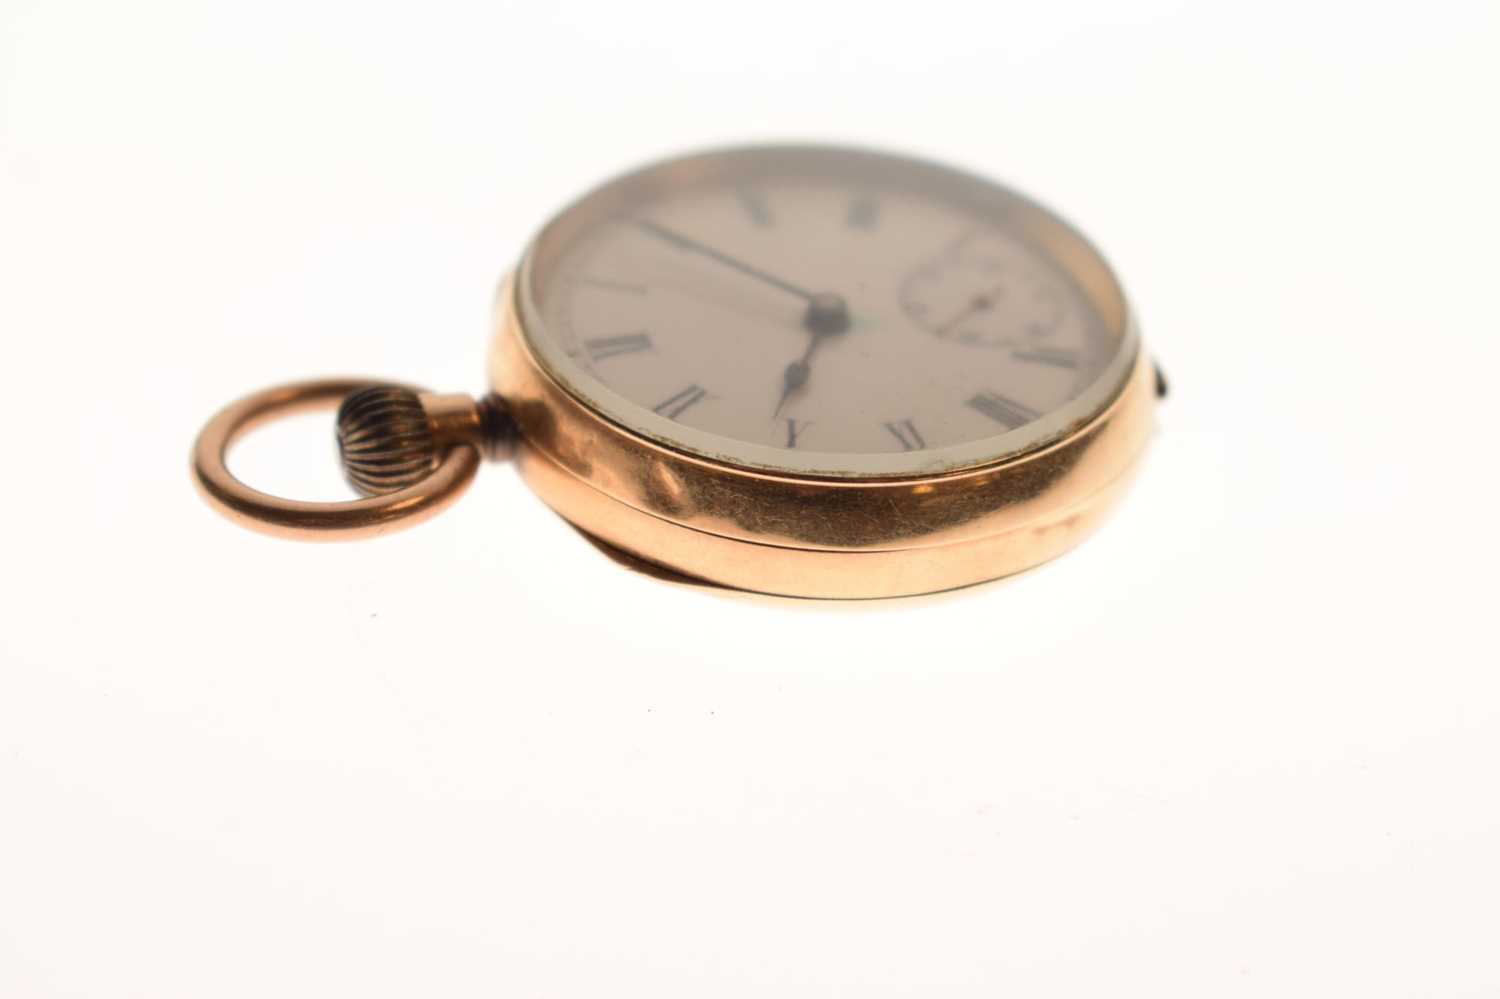 Lady's yellow metal stamped 14k fob watch, Samuel Edgcumbe - Image 3 of 10